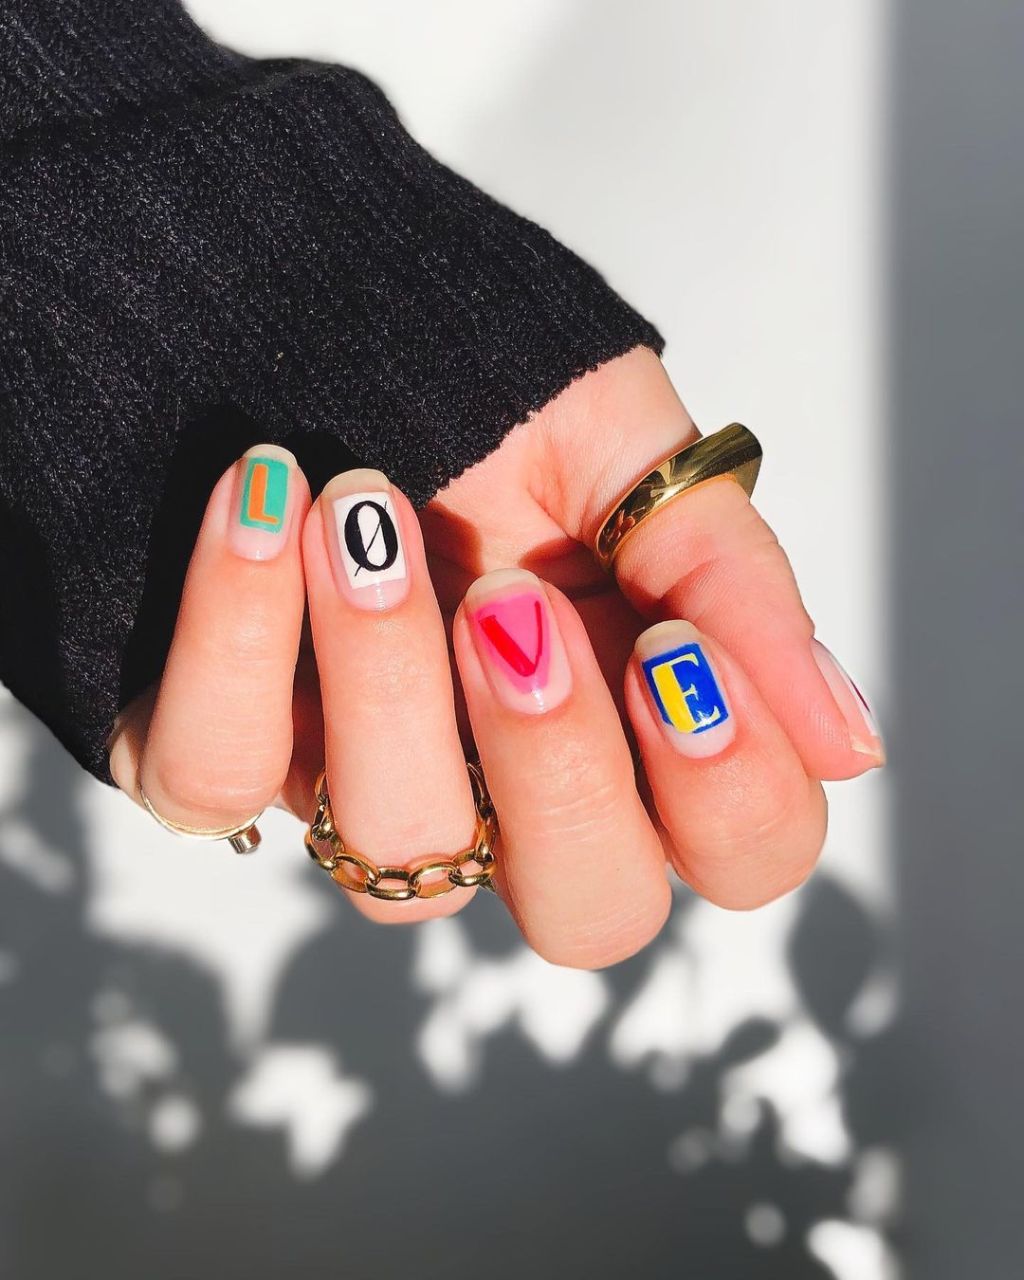 colorful short Valentines Day nails with letter designs that spell out "love"